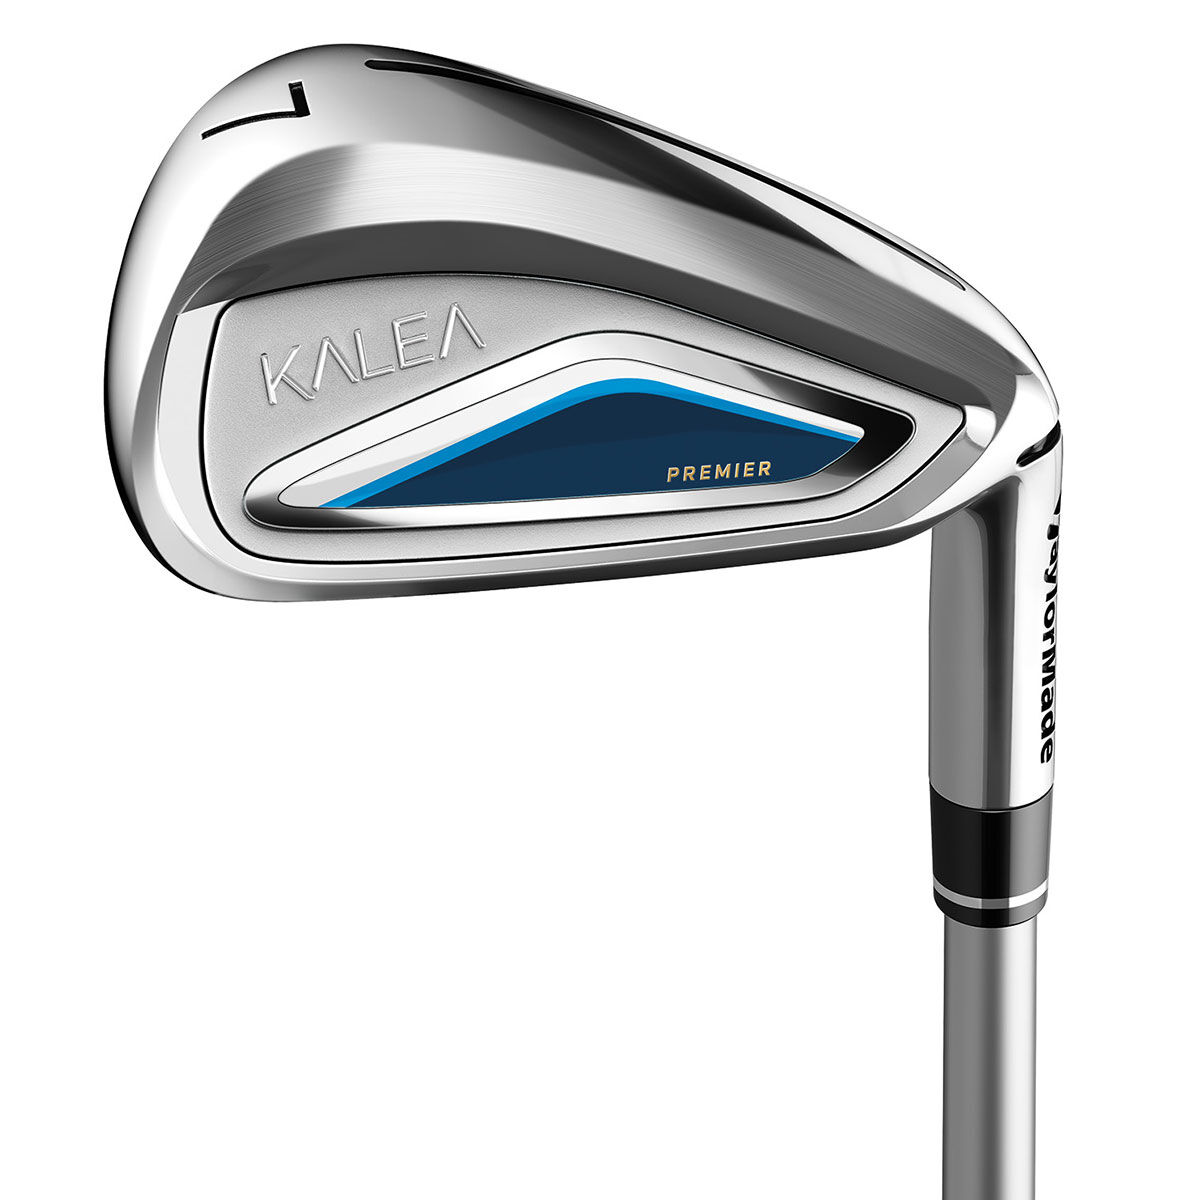 TaylorMade Silver and Blue Lightweight Women’s Kalea Premier Custom Fit Golf Irons | American Golf, One Size